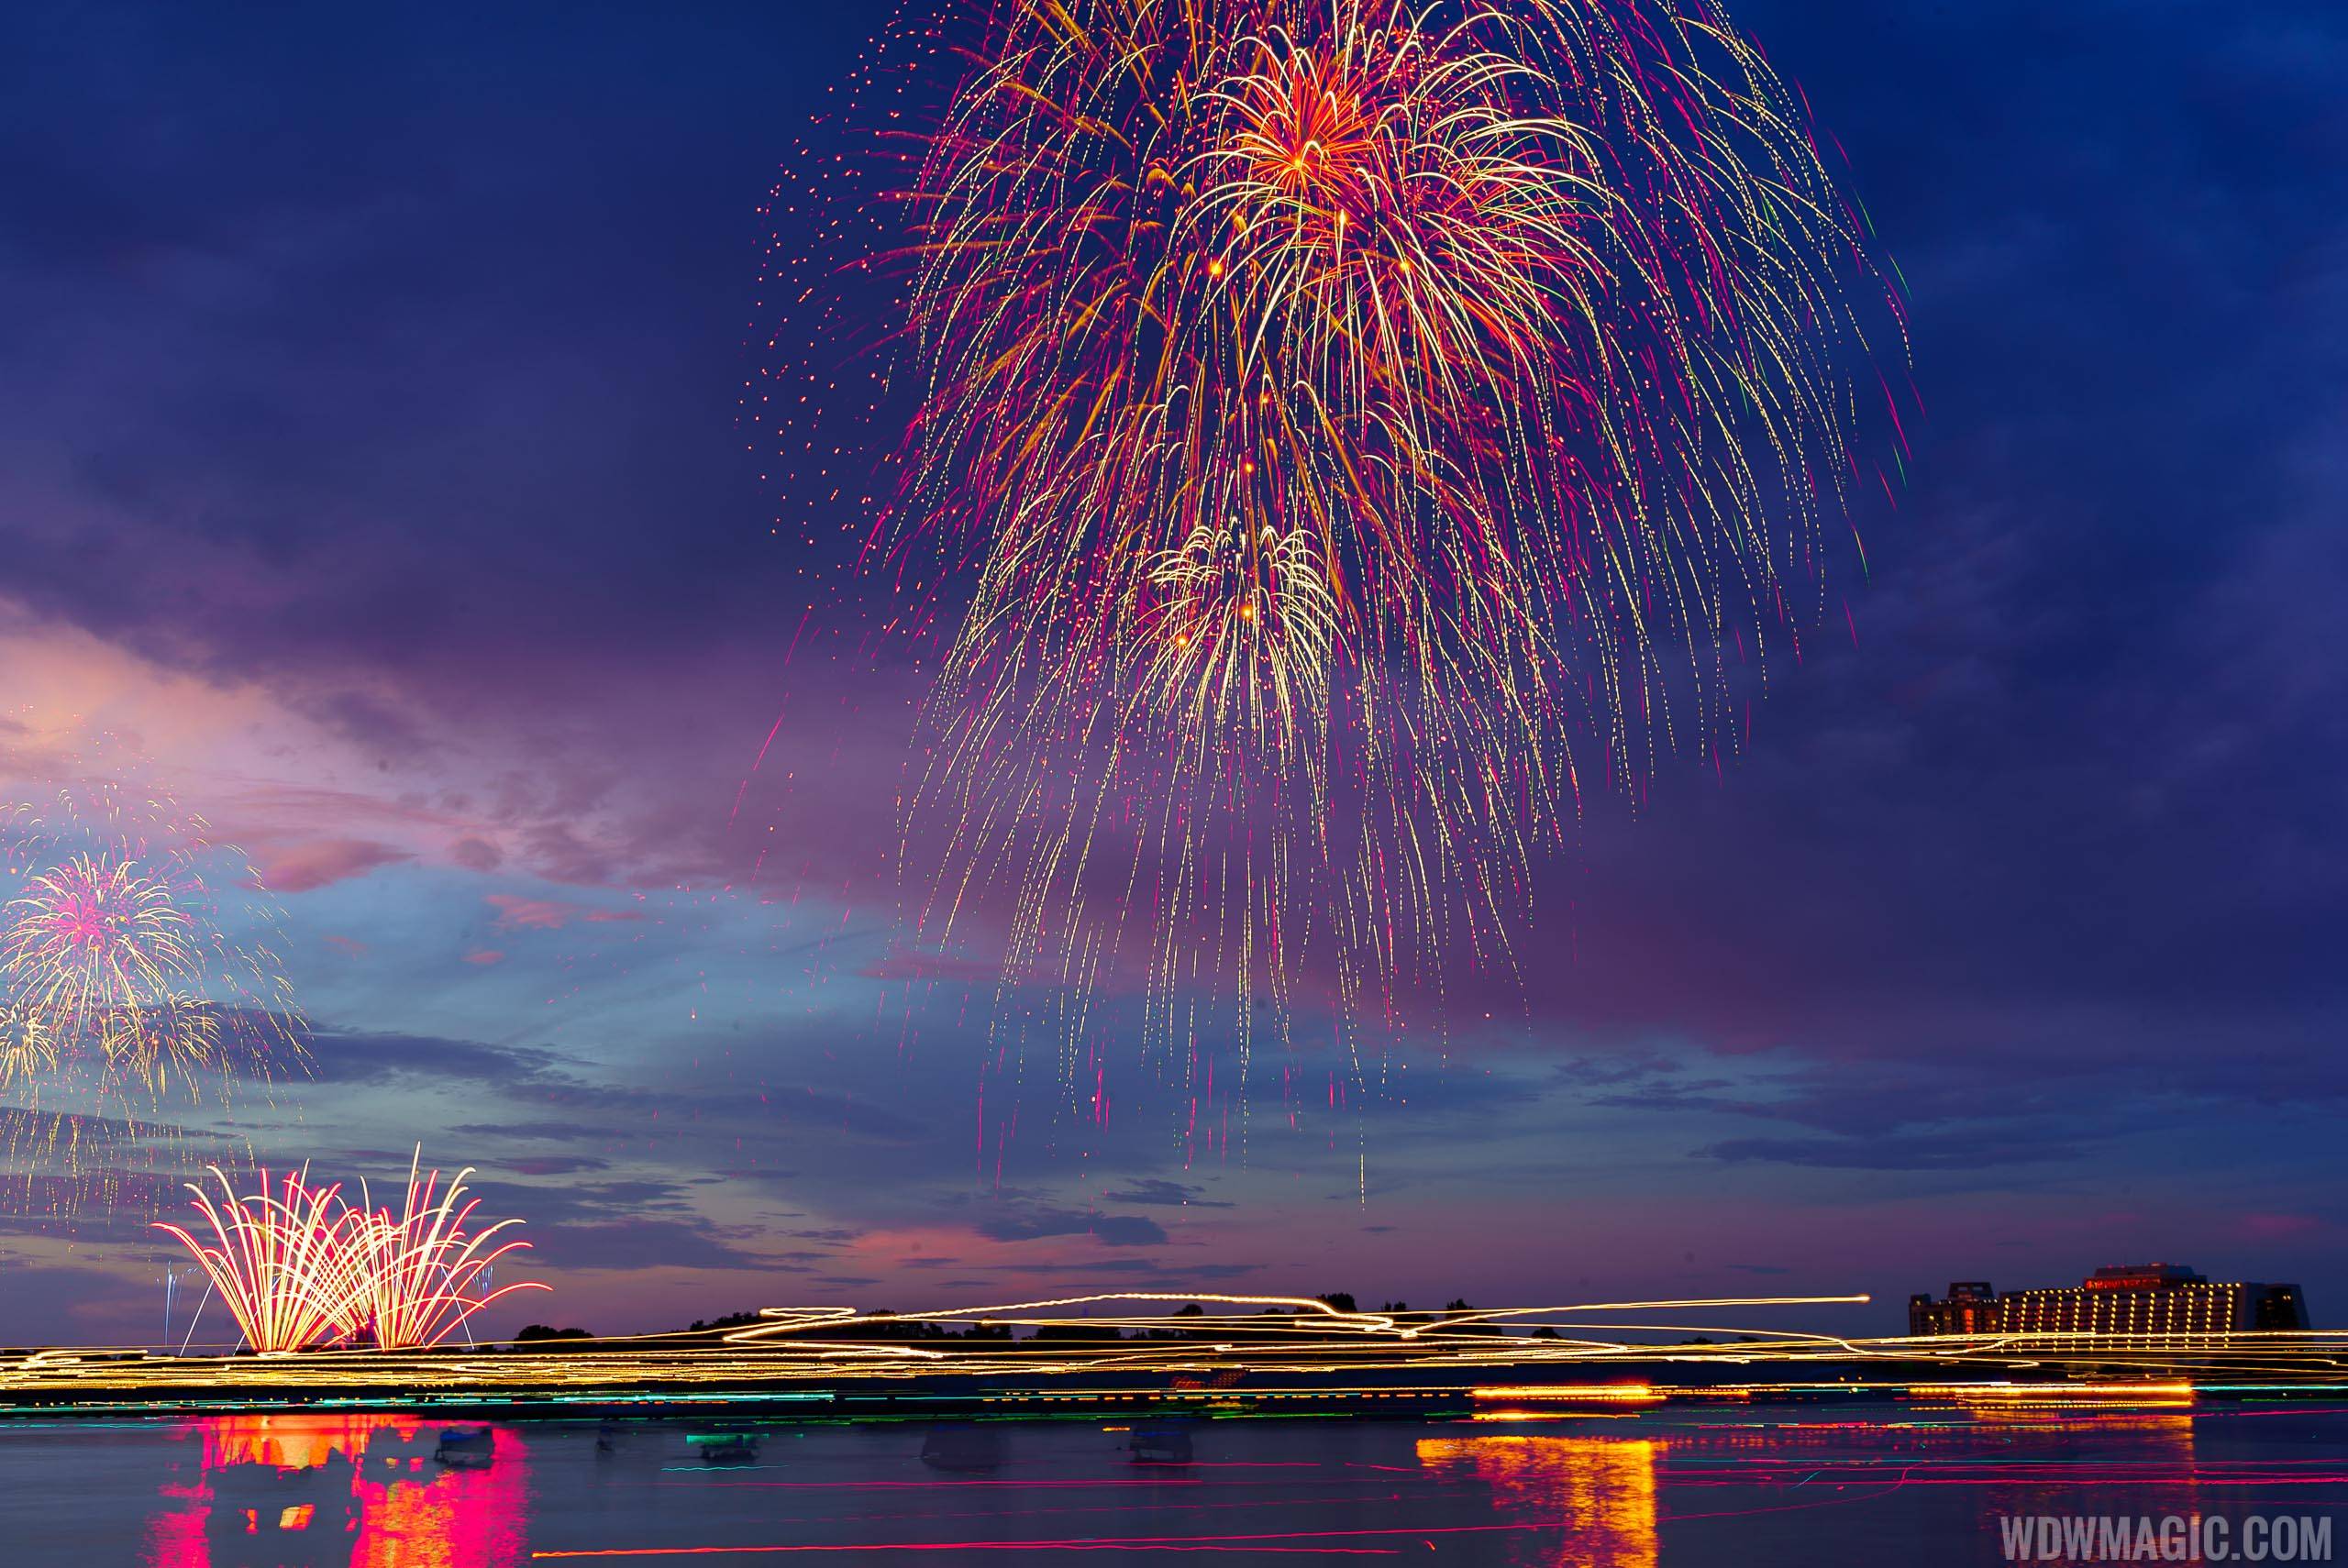 'Disney's Celebrate America!' fireworks to perform on July 3 and July 4 at the Magic Kingdom